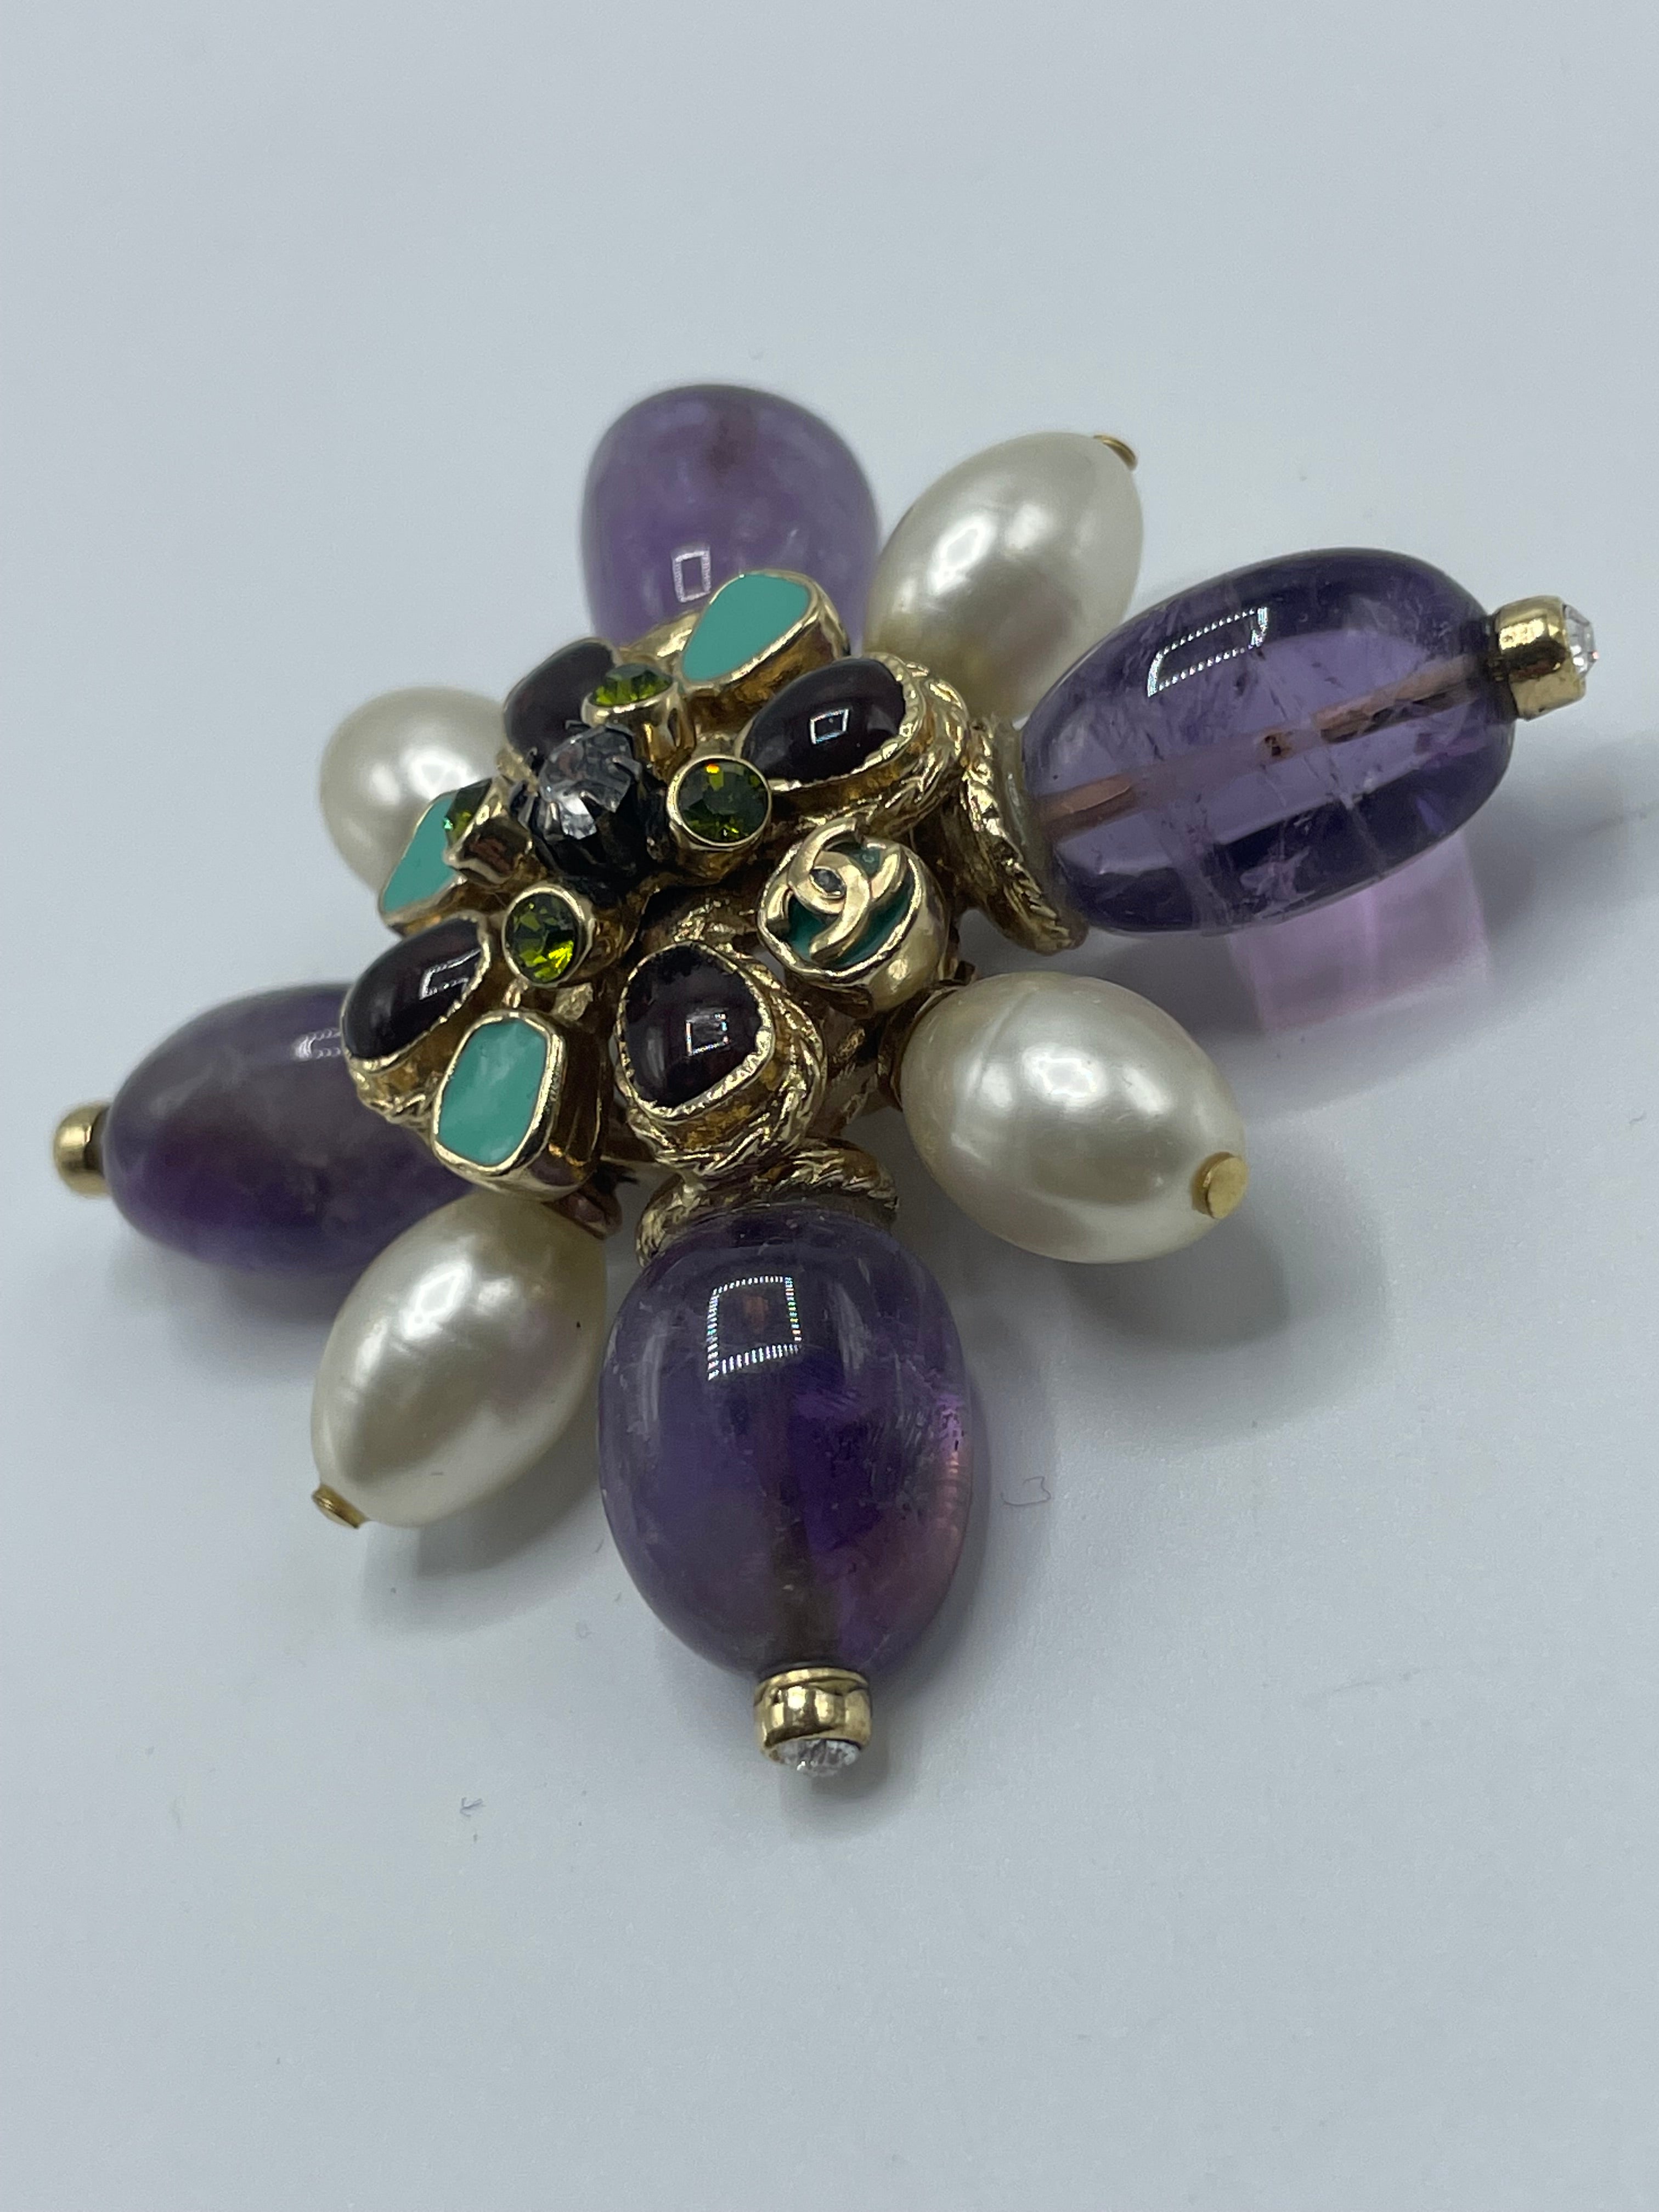 Massive Chanel pin or necklace with four huge, polished, amethyst stones arranged in a starburst or cross arrangement. Gripoix poured glass and crystal stones into the amethyst's core and outermost points. On the back, there is a large CC. It has a